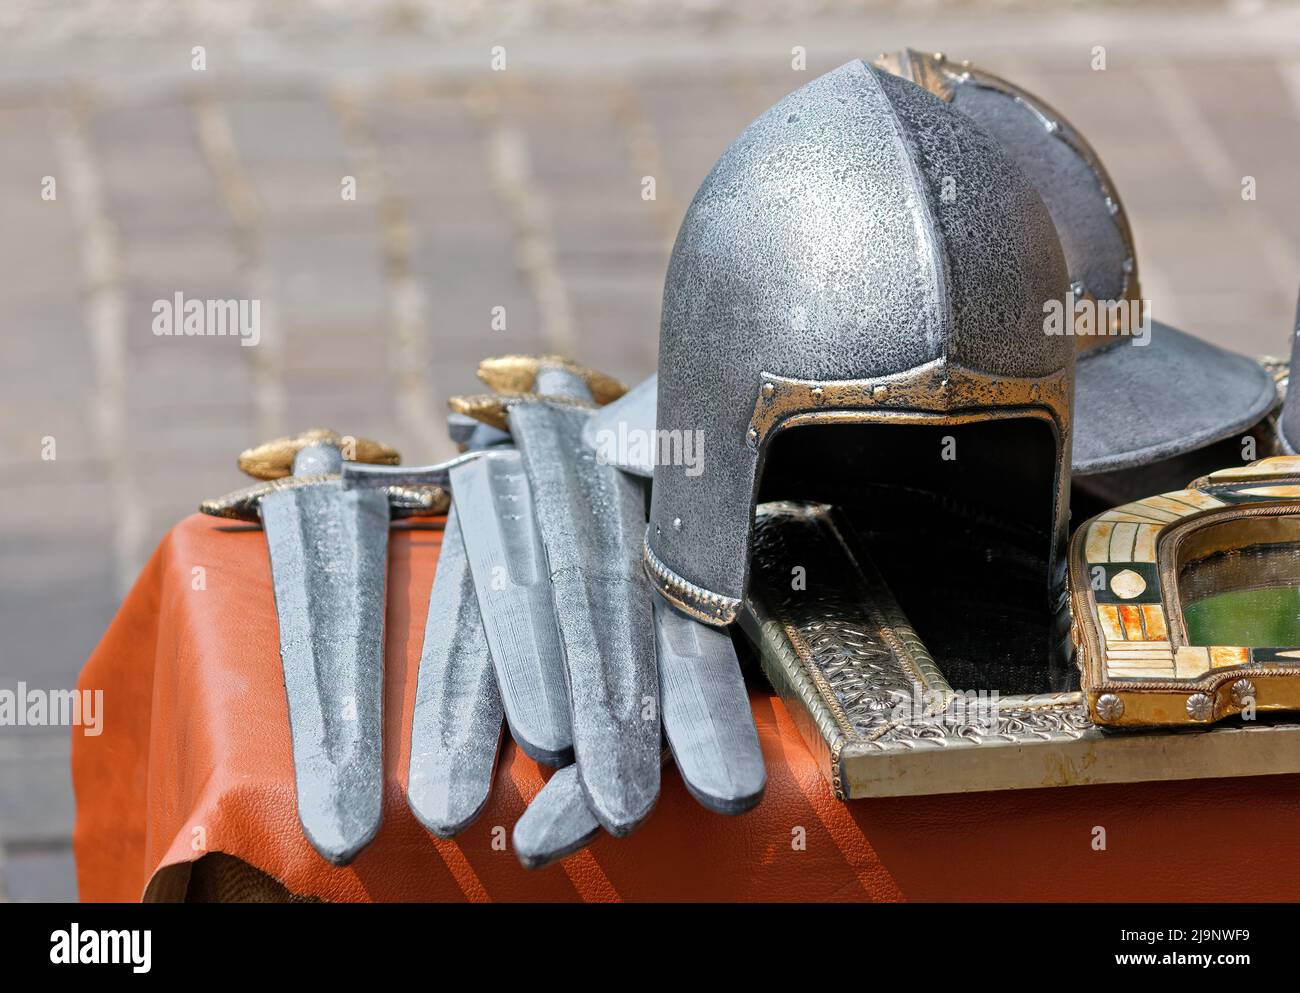 Daggers, helmets and other objects on display during an ancient history historical reenactment Stock Photo